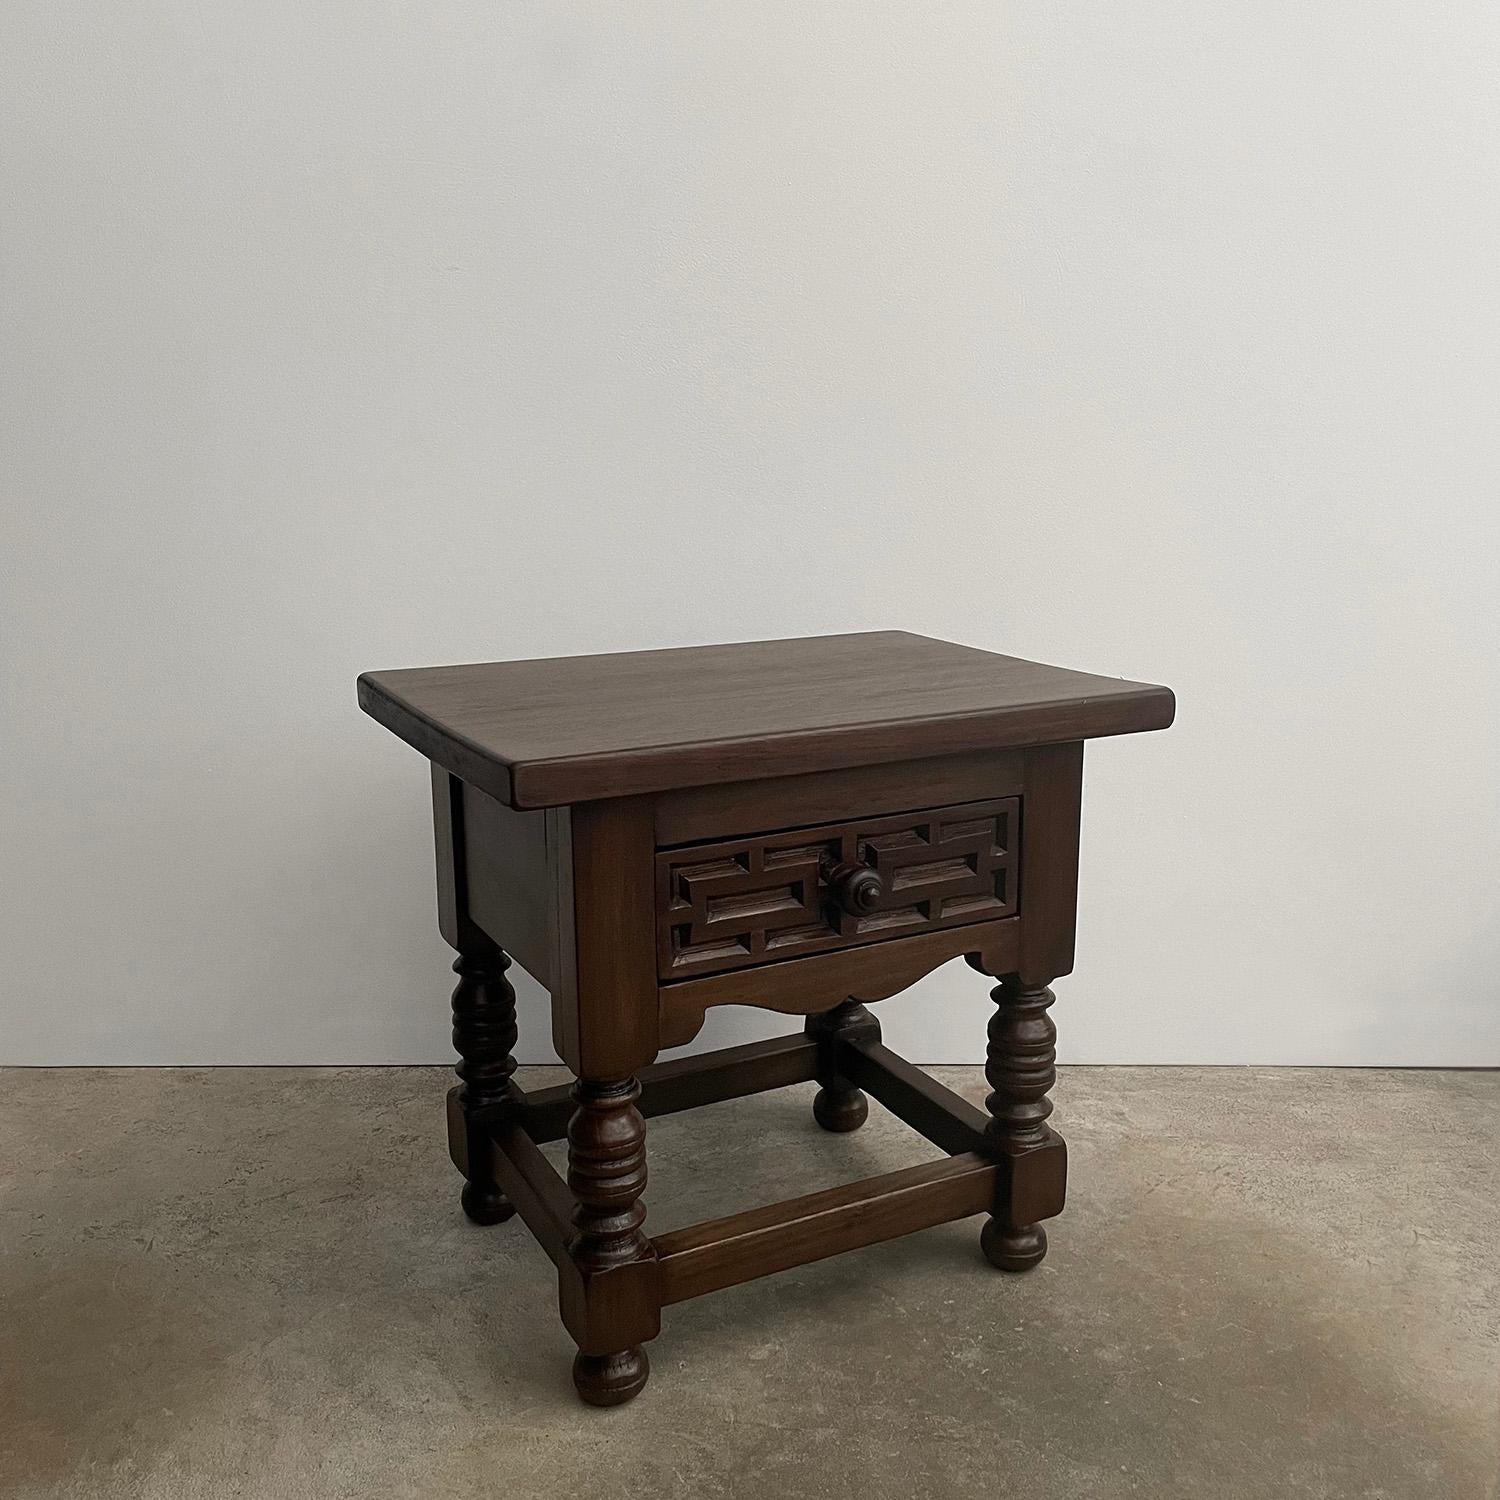 Pair of French carved oak end tables 
France, mid century 
Solid wood hand crafted artisanal piece 
Beautiful wood grain detail
This pair of tables are well constructed and heavy weight 
Each table has a single drawer which is accented with carved